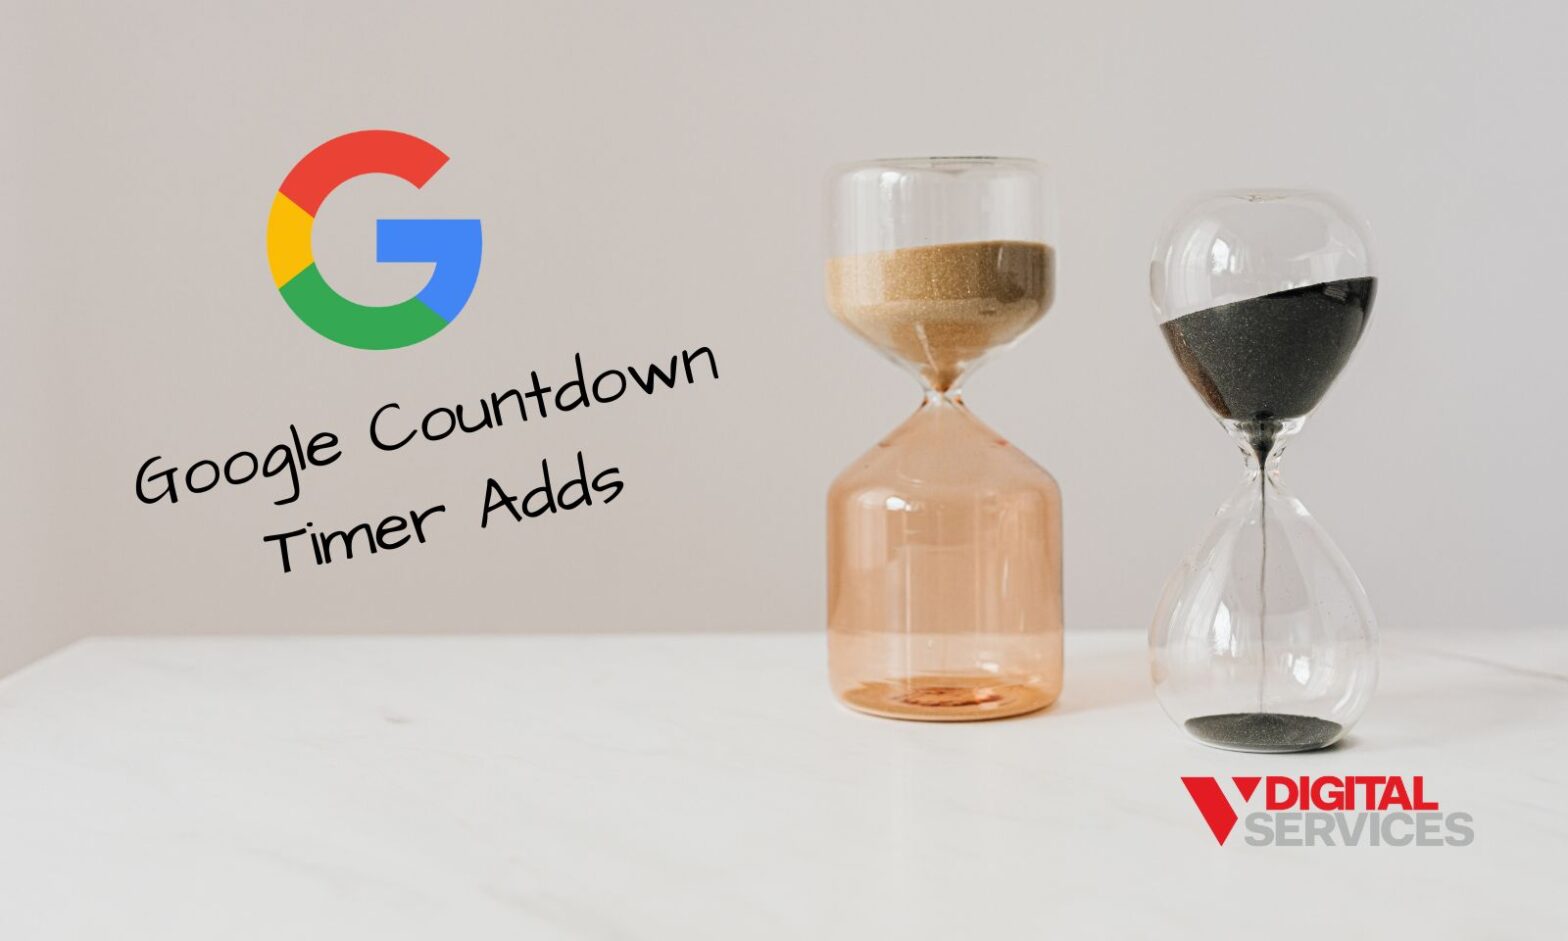 Google Countdown Timer Adds